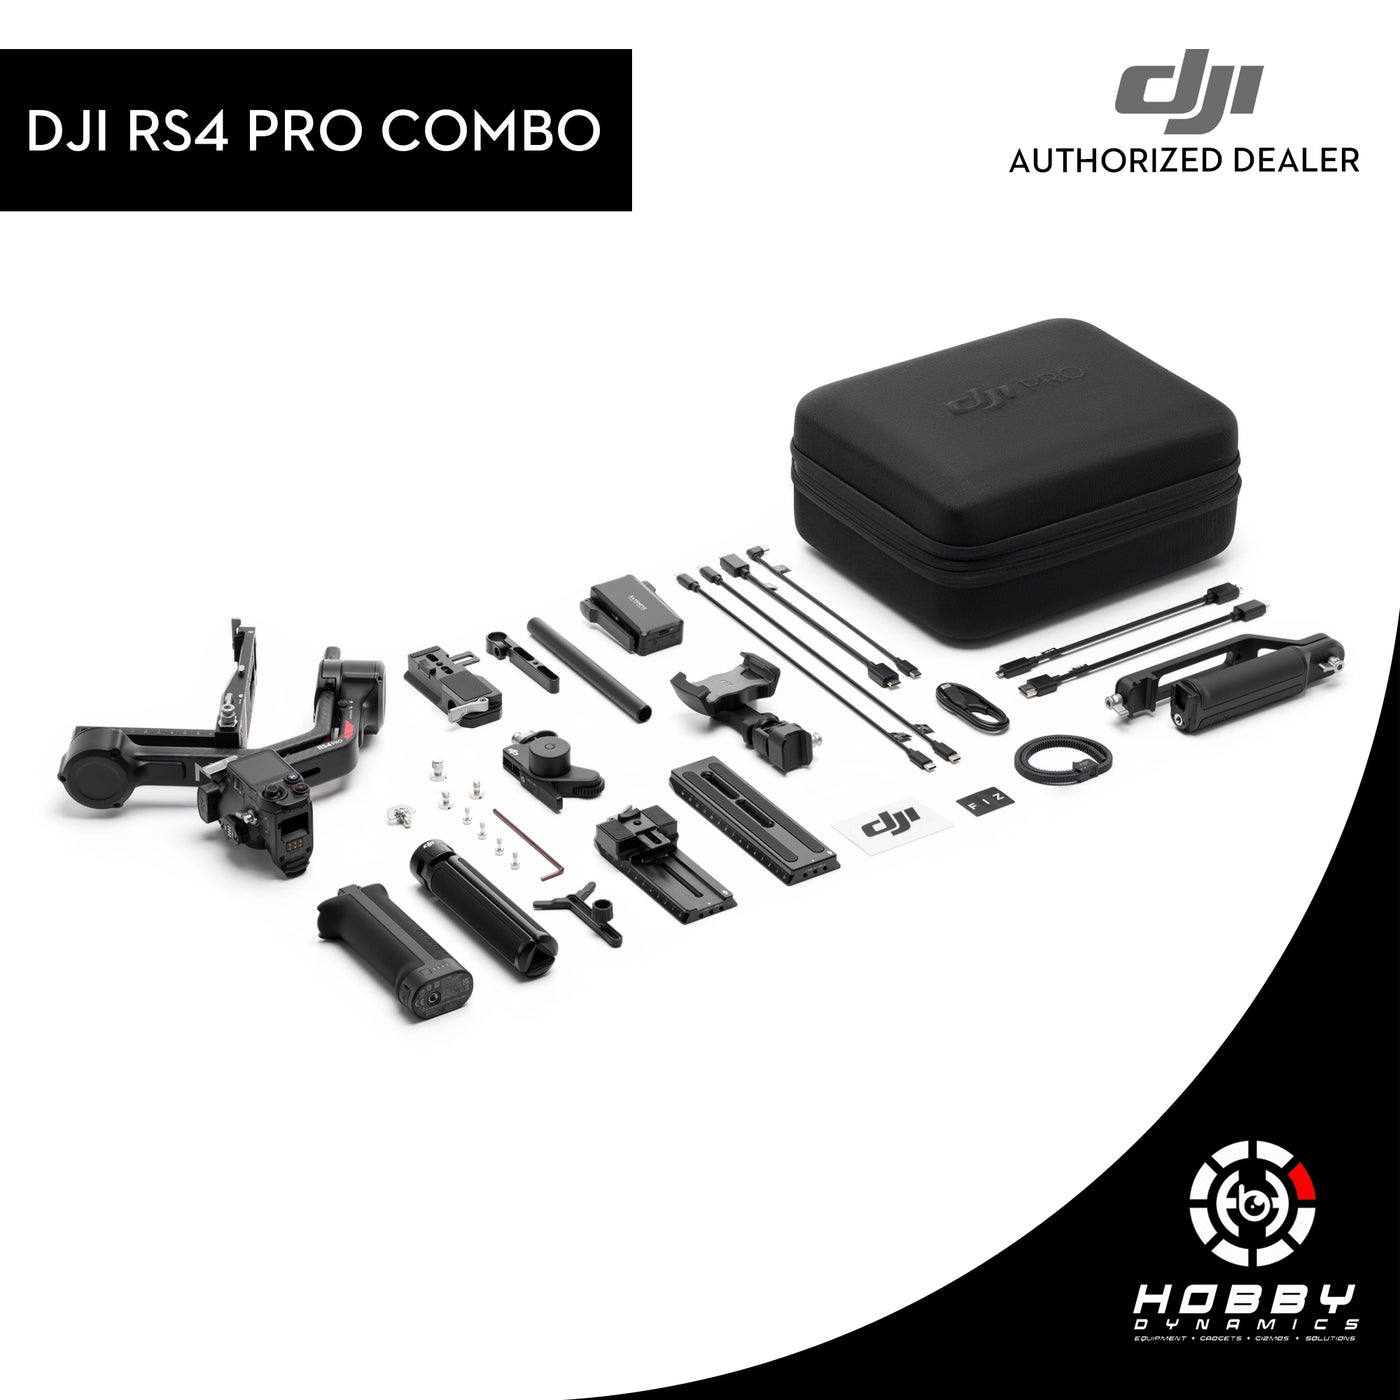 DJI RS 4 PRO COMBO - Expansive Flagship Stabilizer